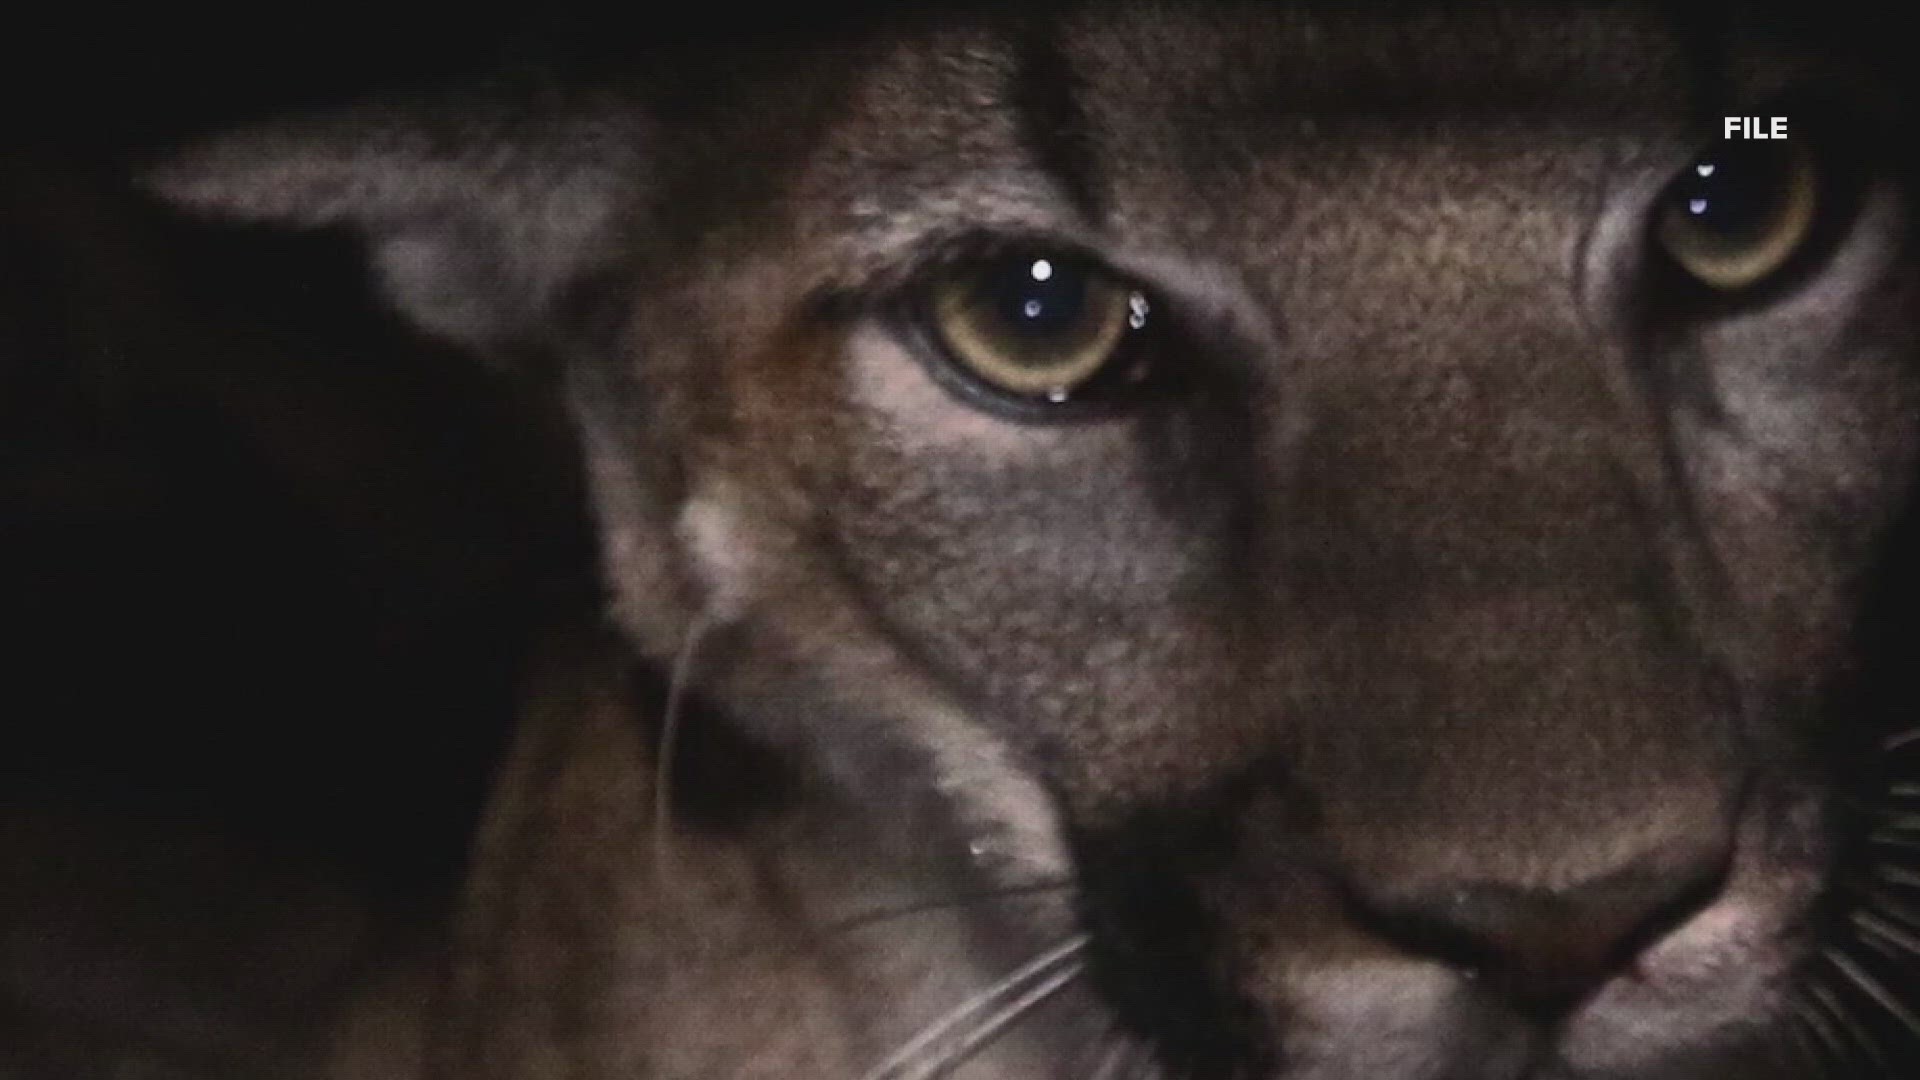 Cannon Beach police said there were two separate sightings on Monday, just weeks after a cougar climbed Haystack Rock.